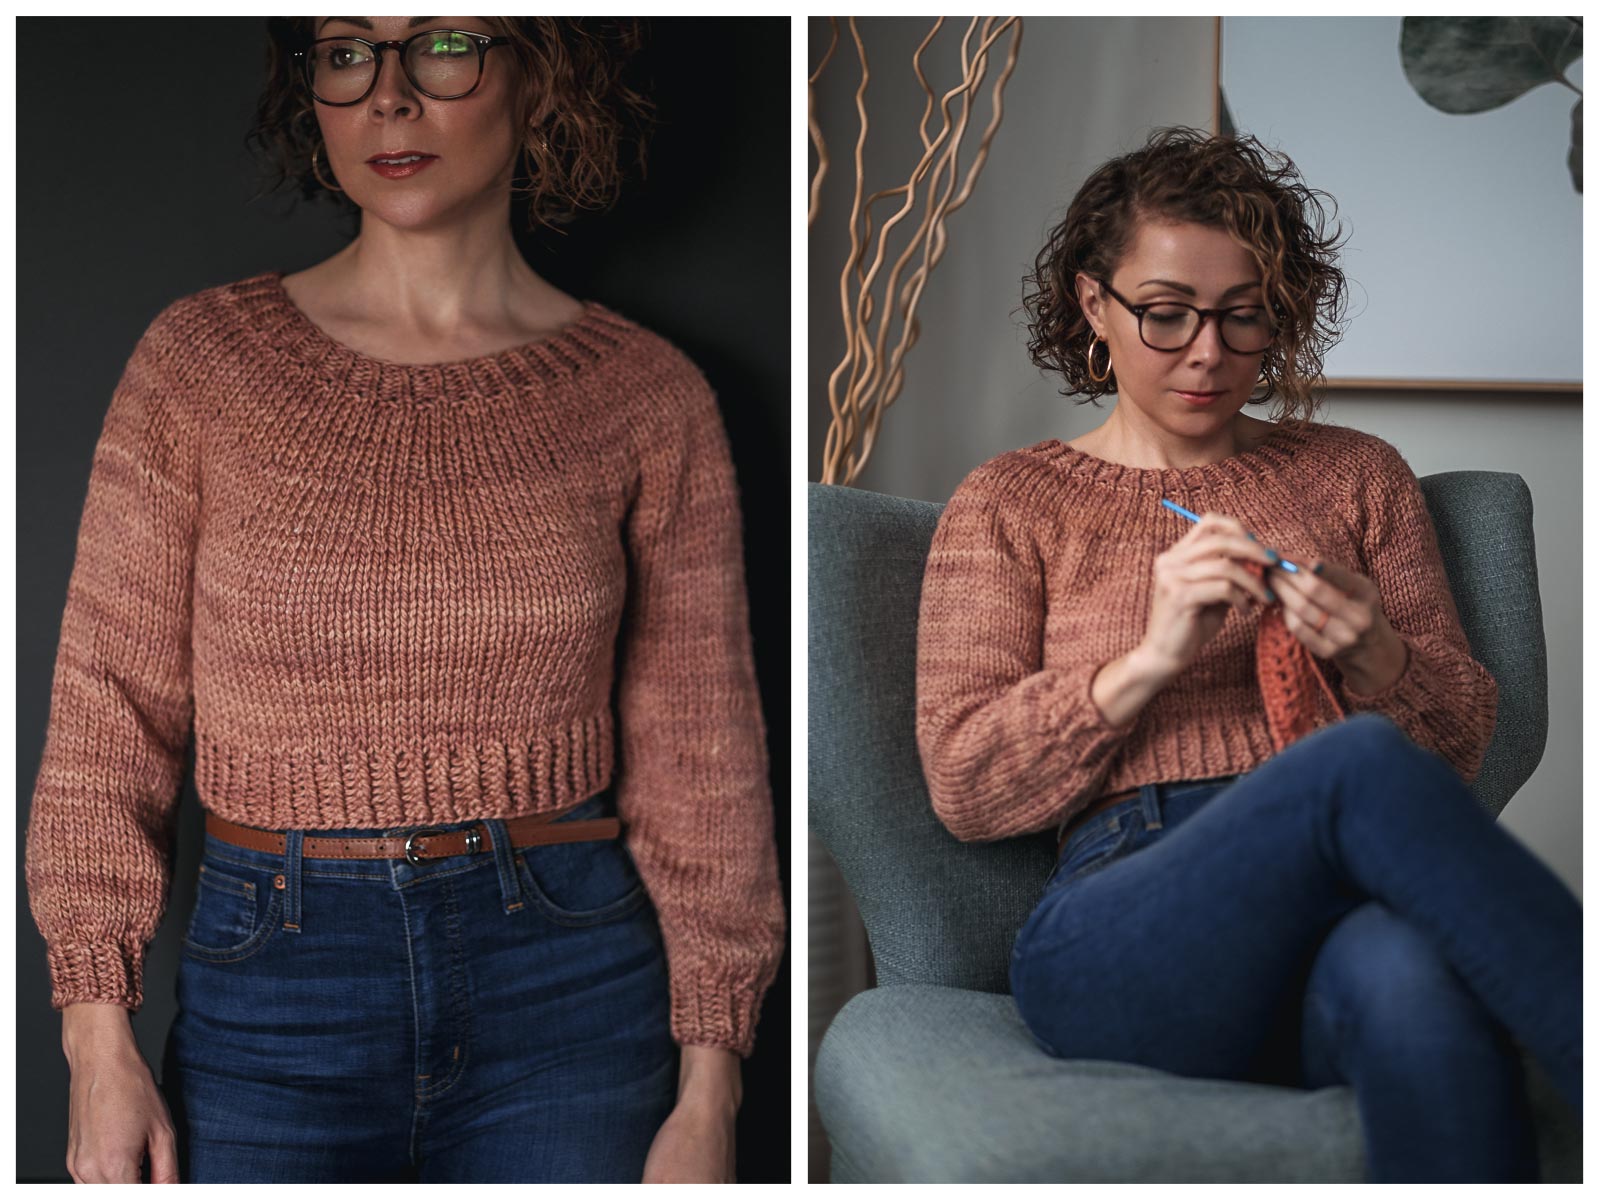 How to knit a sweater – 7 tips when you want to knit your first sweate